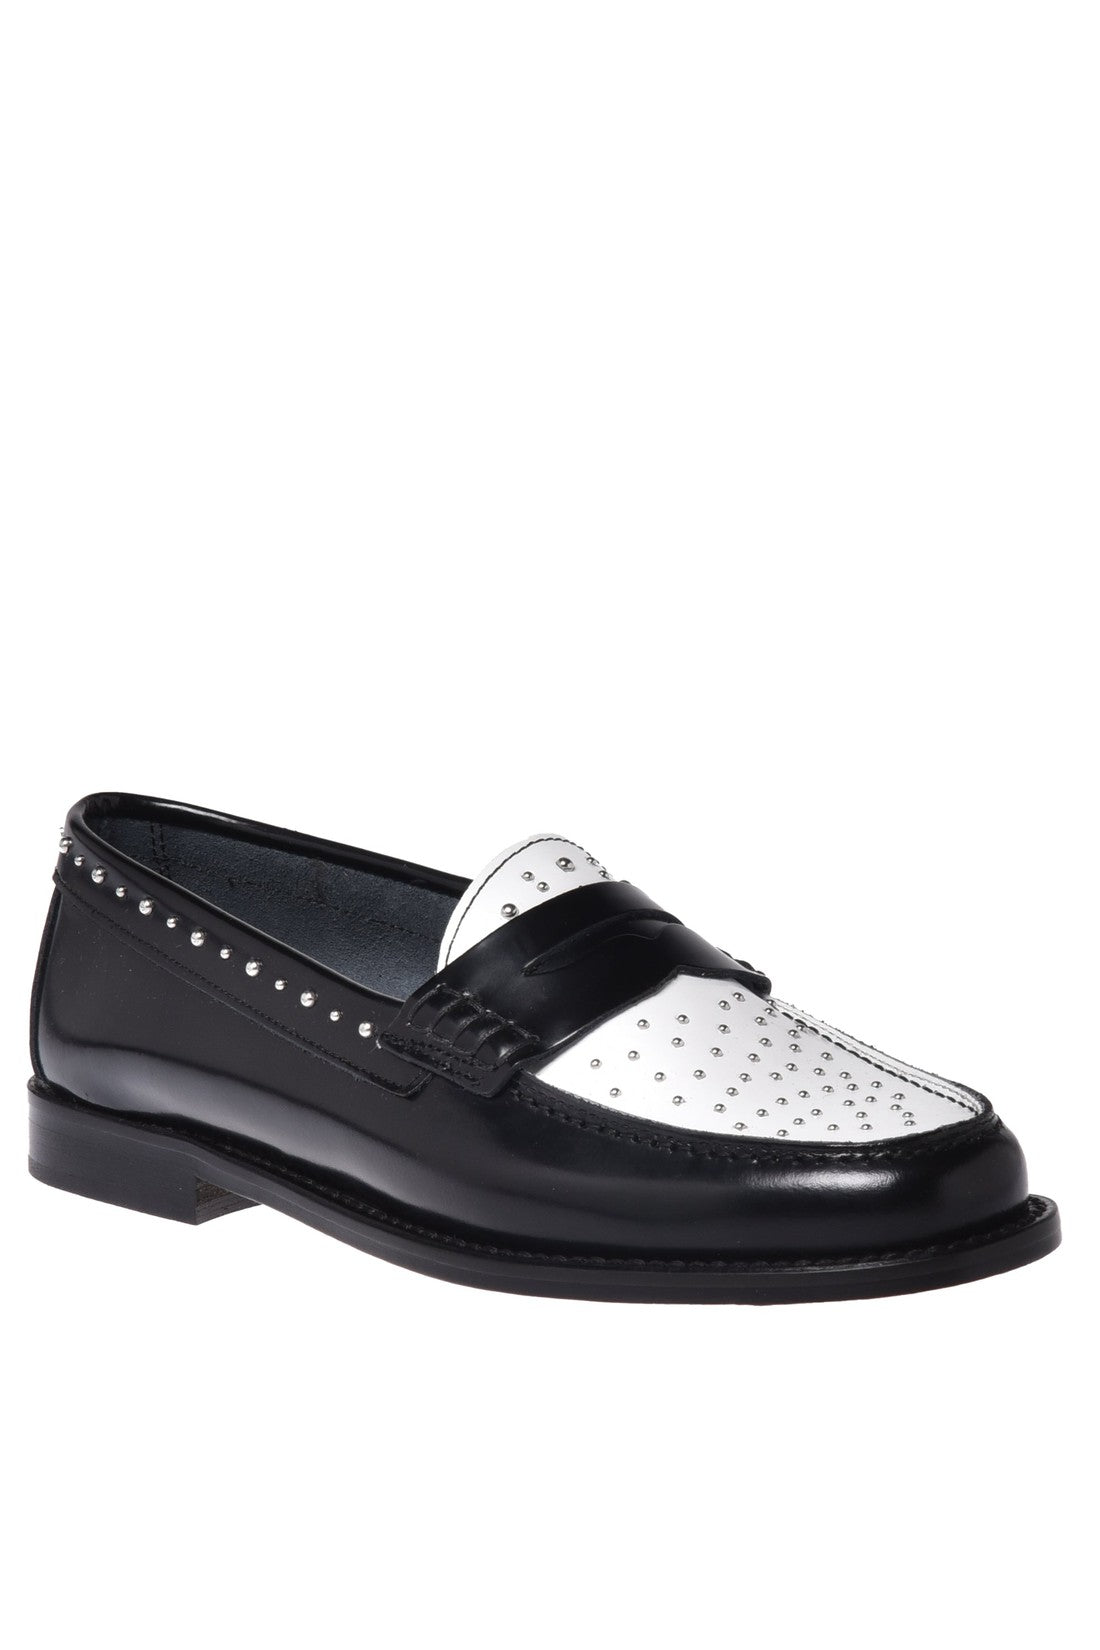 Loafer in black and white shiny calfskin